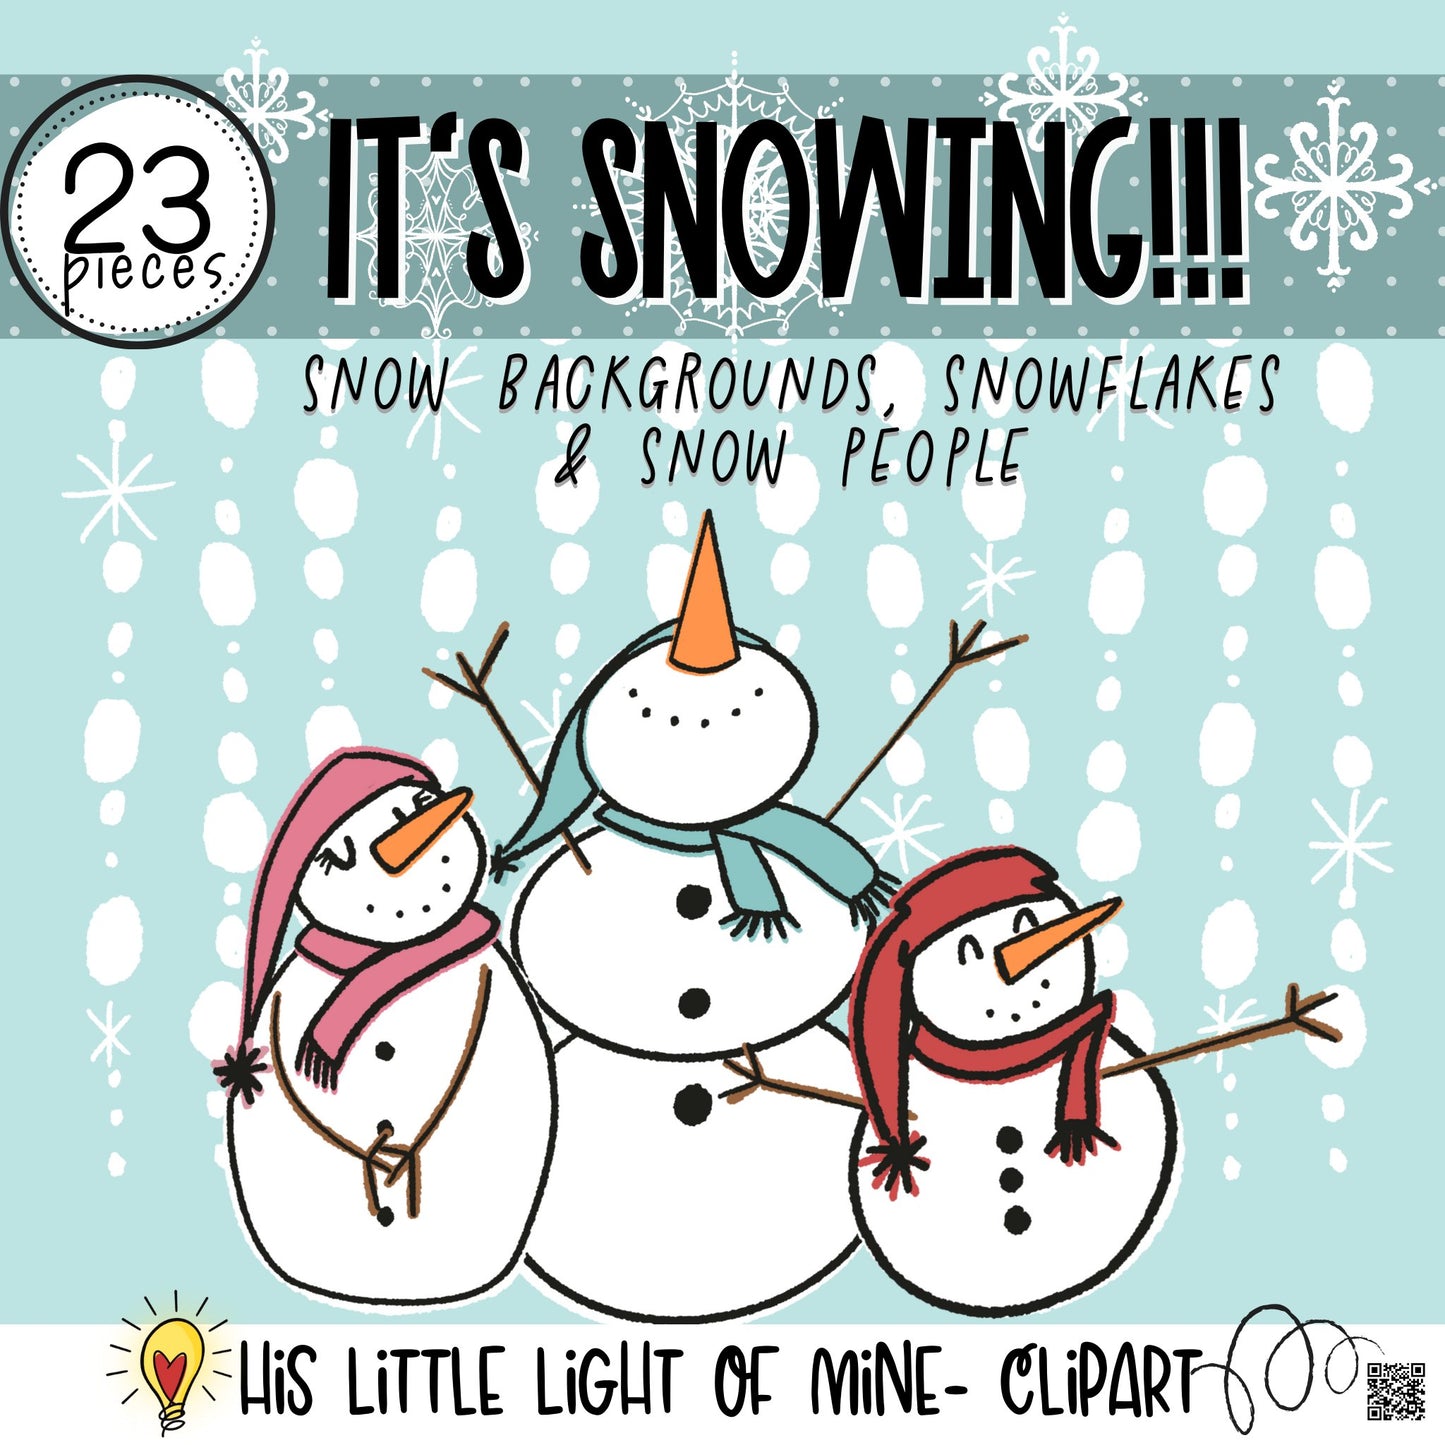 Cover Image of the It’s Snowing clip art pack featuring snow backgrounds, snowflakes and snow people, snowmen, snowman, snowwoman, snowgirl, snowboy